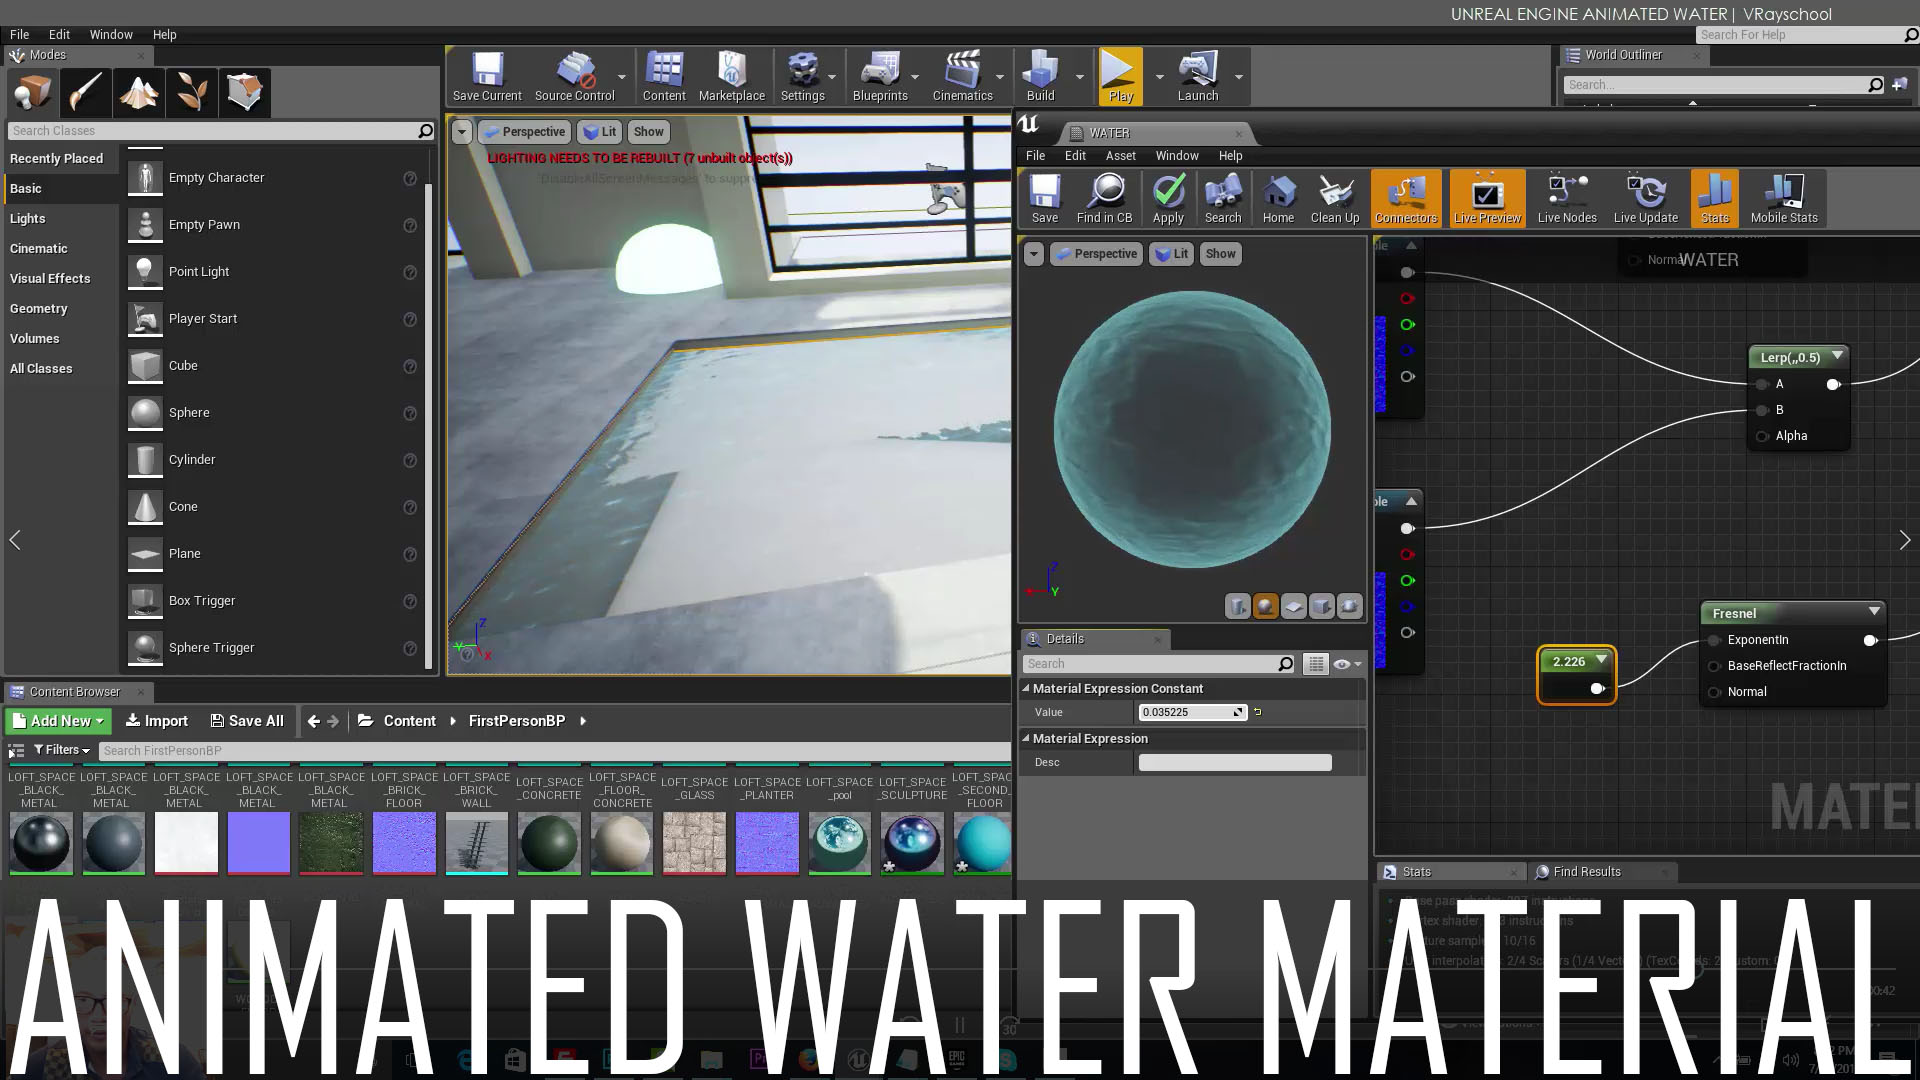 Animated Water Material